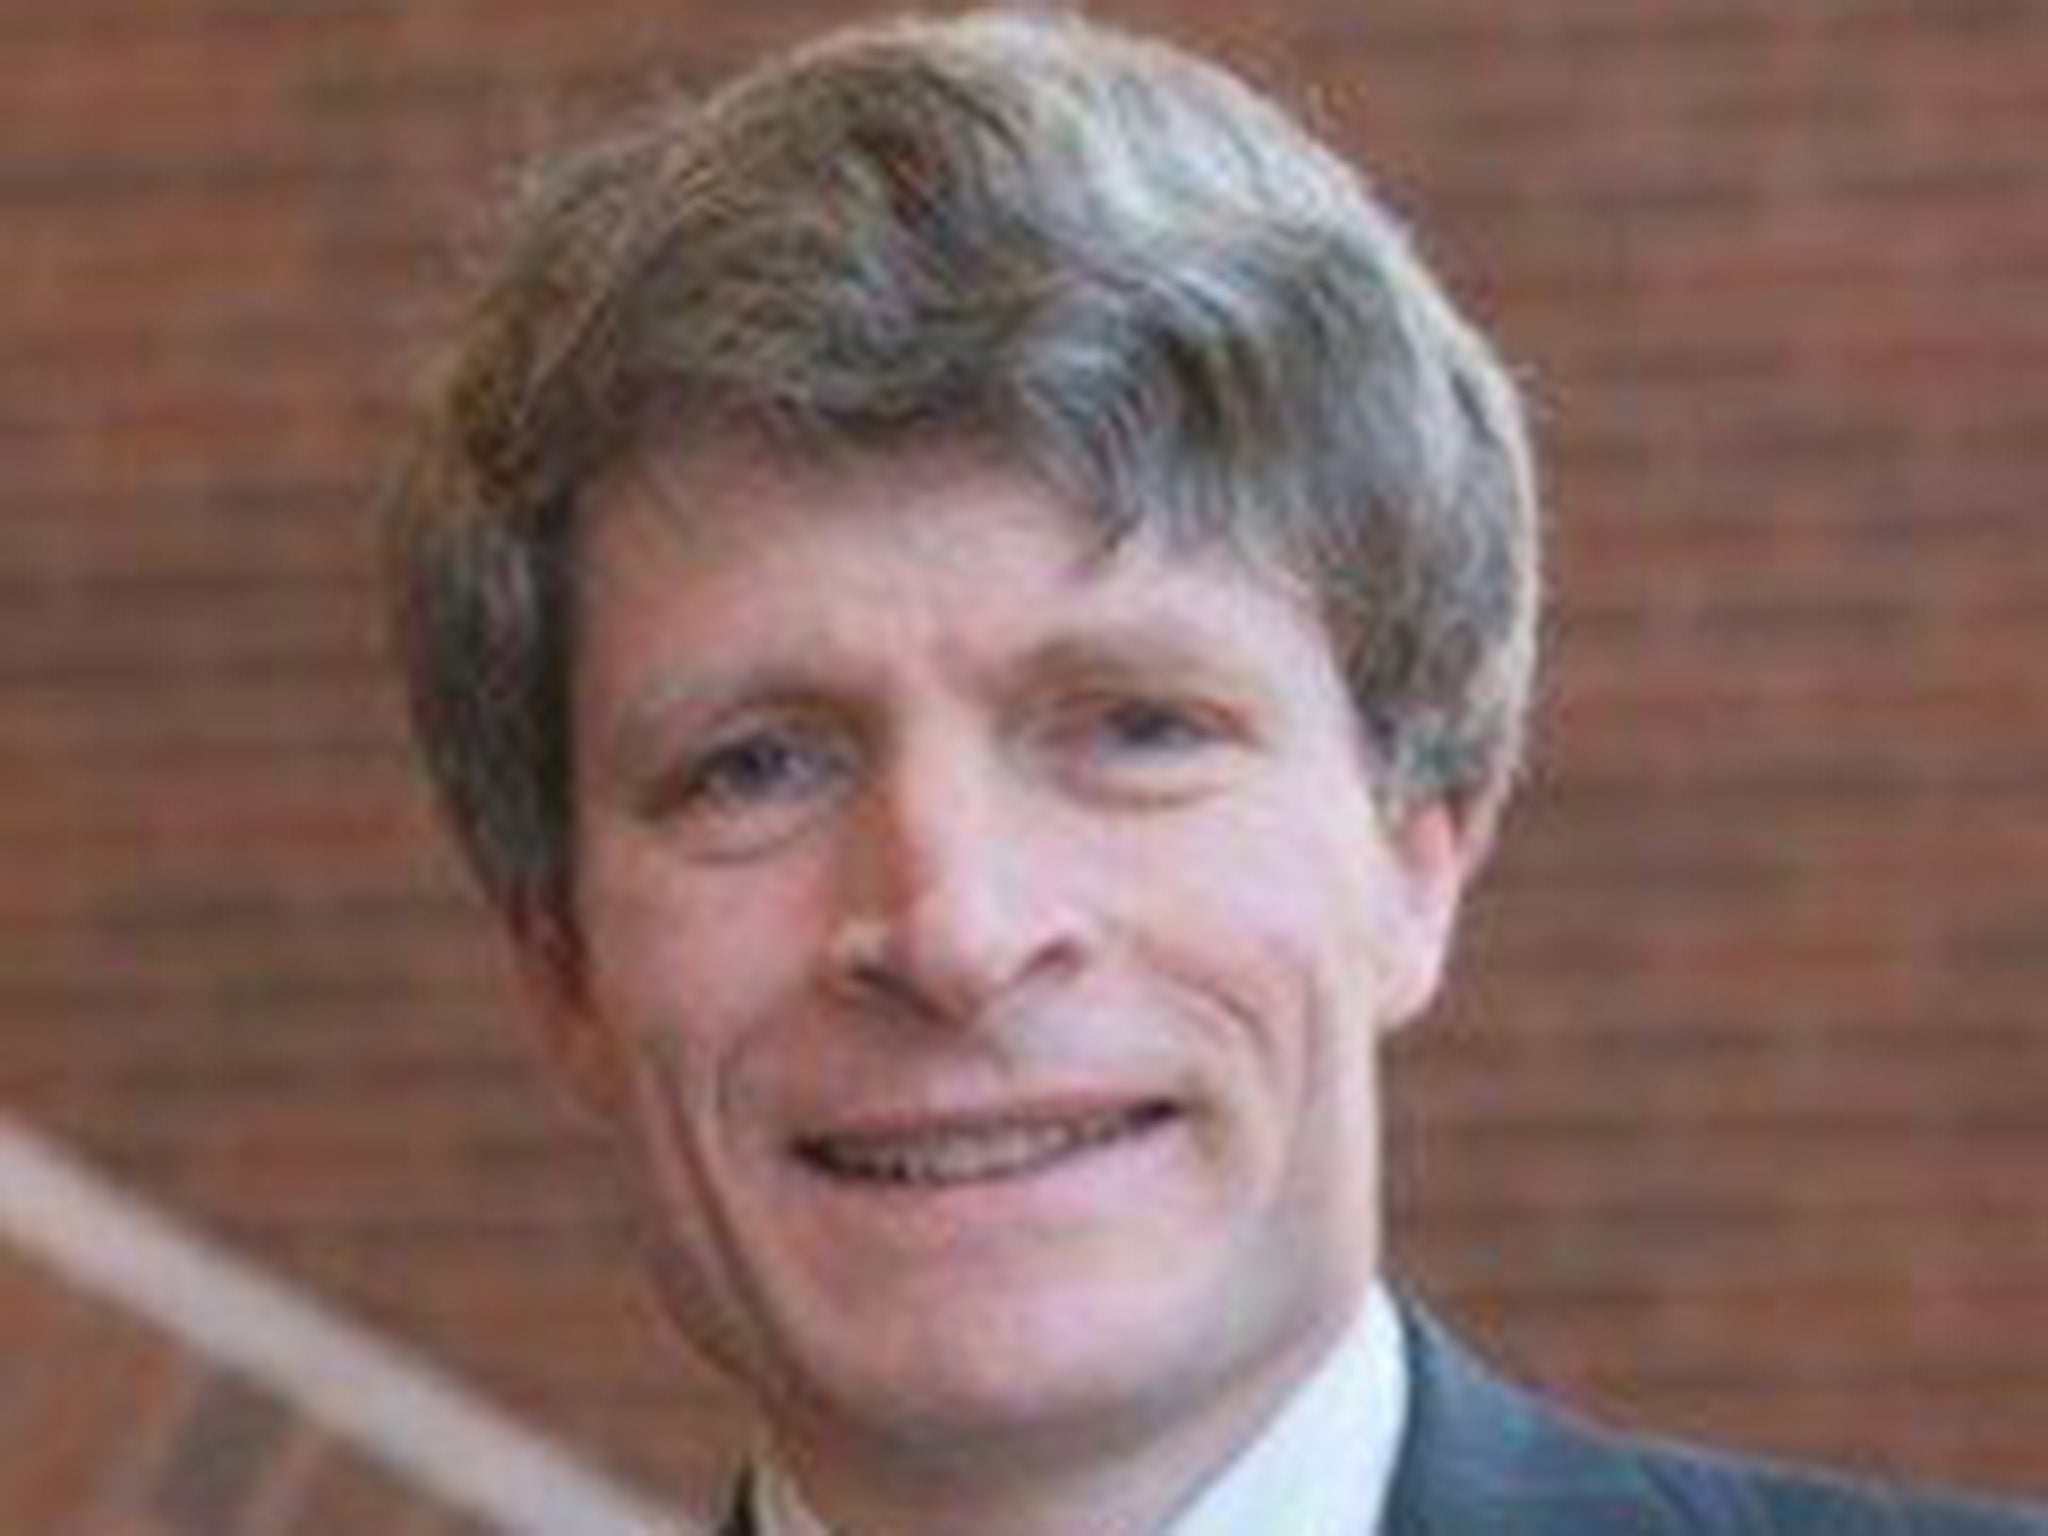 Richard Painter served as President George W Bush's ethics lawyer between 2005 and 2007